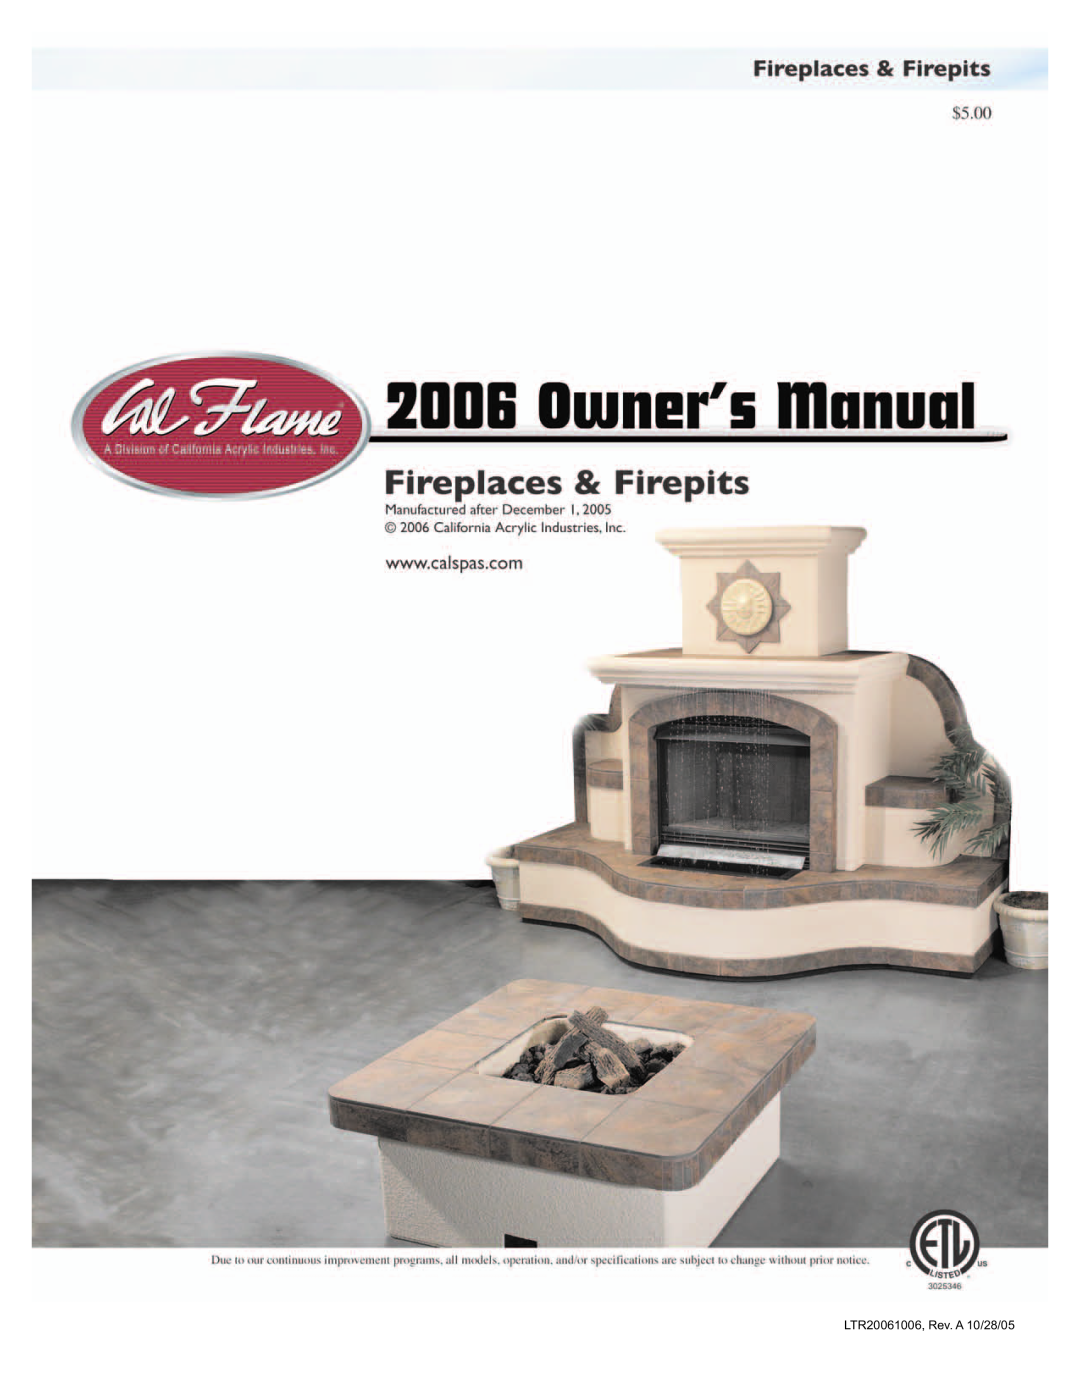 Cal Flame Fireplaces & Firepits 2006 manual LTR20061006, Rev. A 10/28/05 